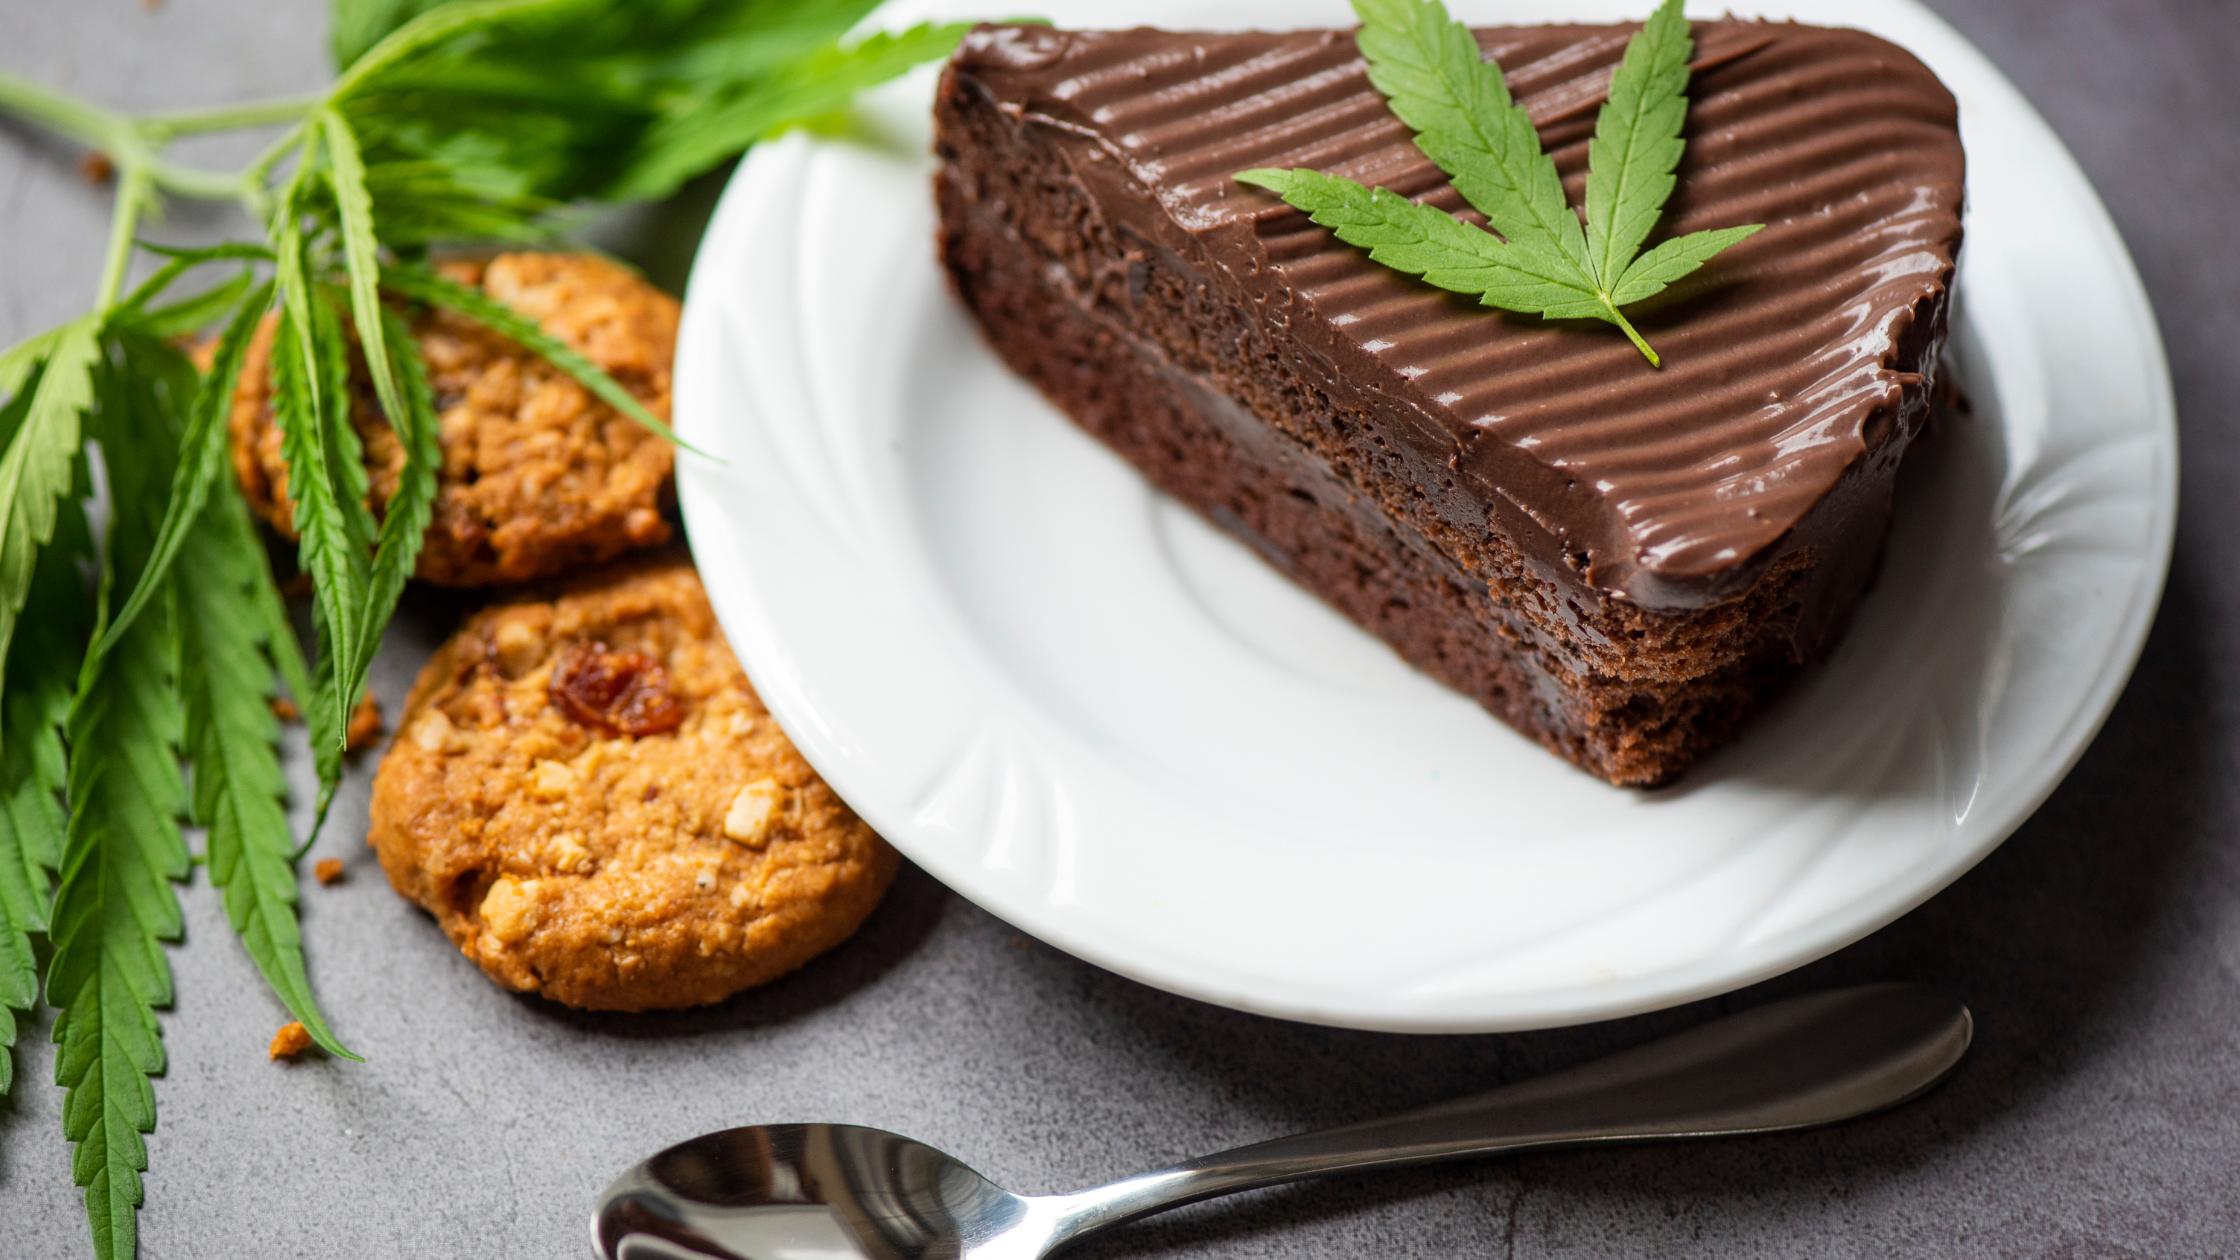 Cooking with cannabis